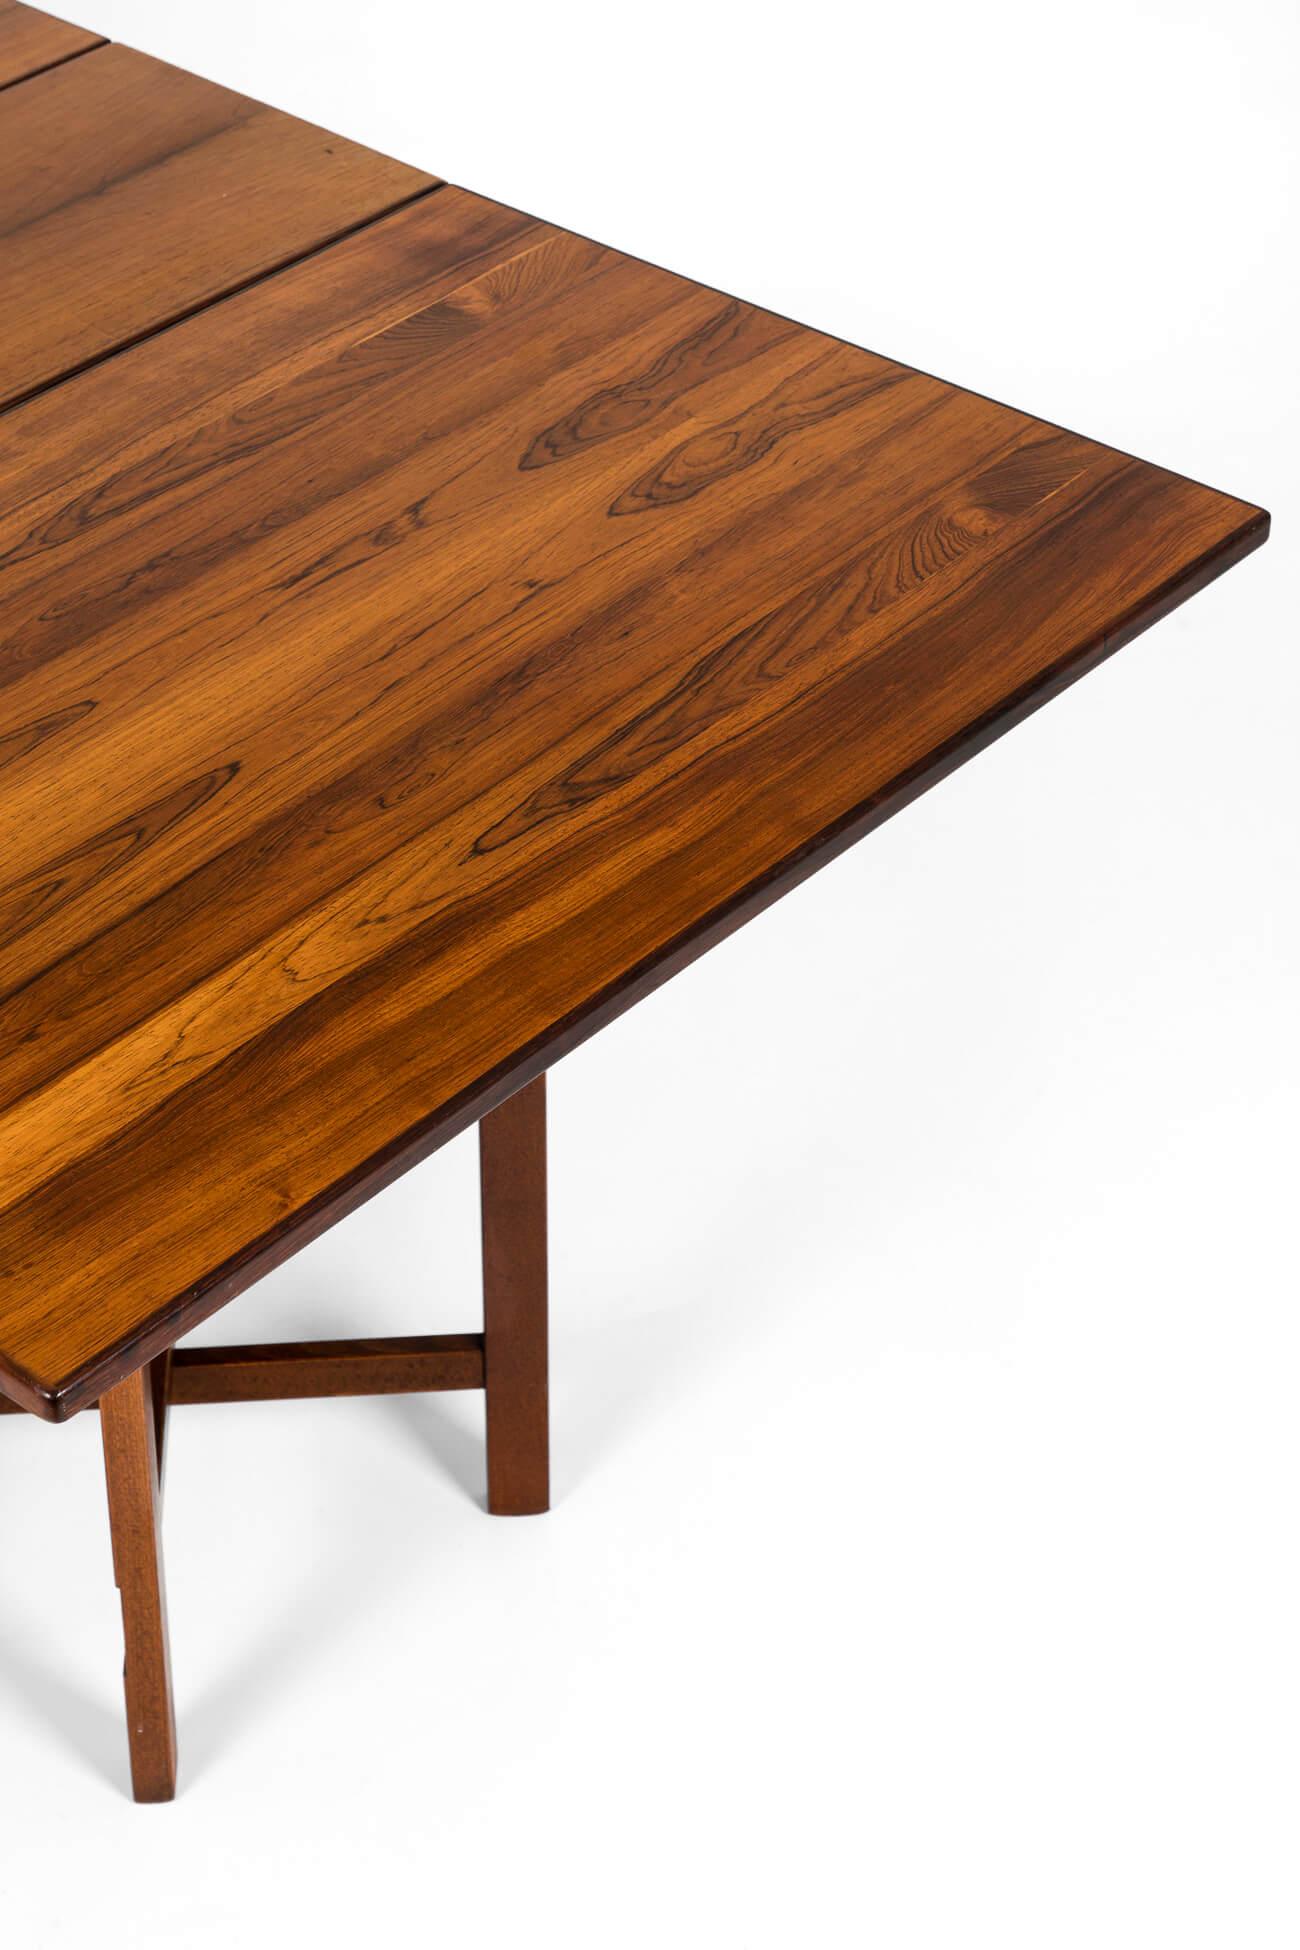 Mid-20th Century Rosewood Drop-Leaf Dining Table Designed by Bendt Winge, circa 1950 For Sale